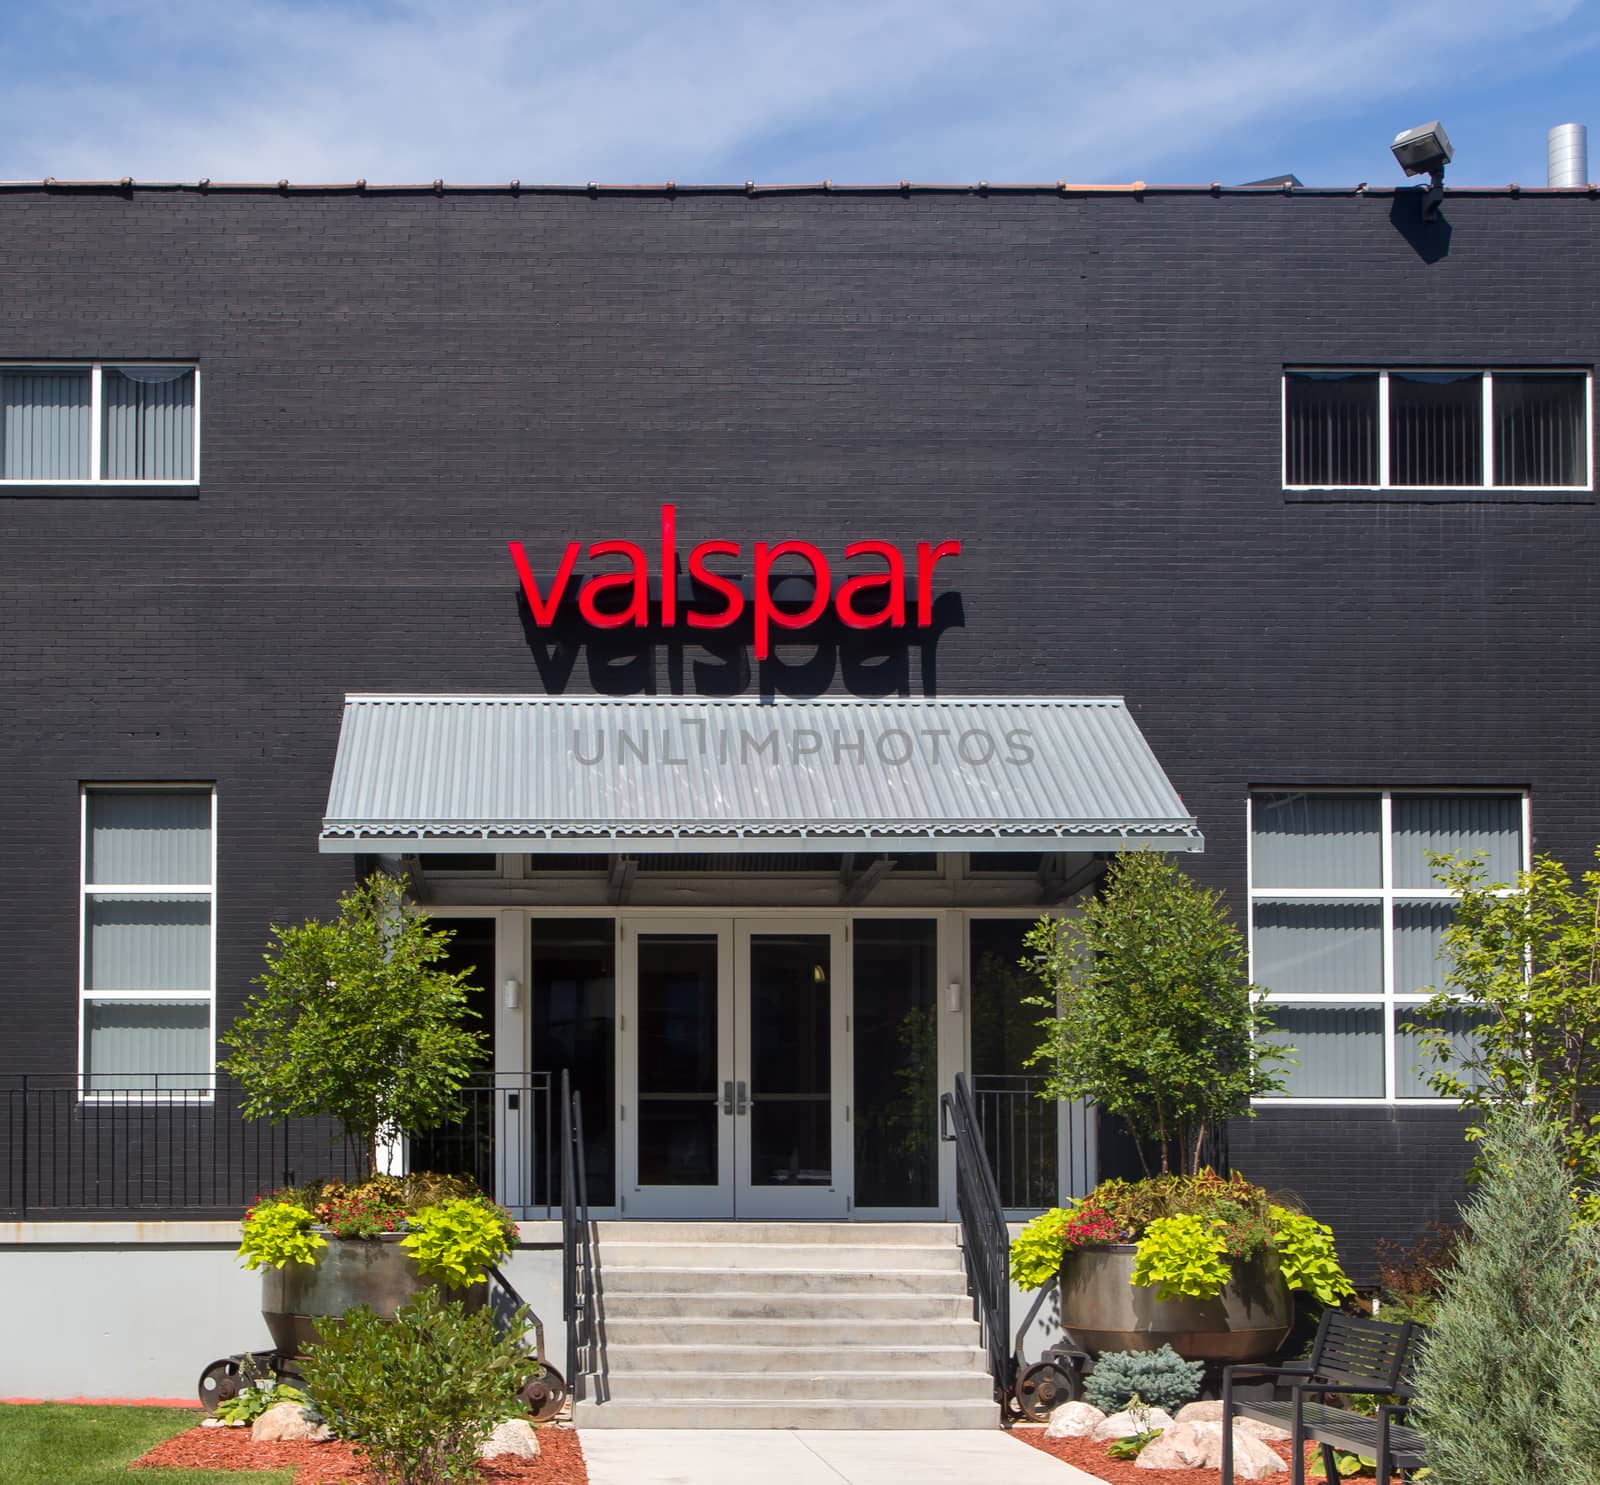 MINNEAPOLIS, MN/USA - AUGUST 5, 2015: Valspar corporate headquarters entrance. The Valspar Corporation is an American international manufacturer of paint and coatings.